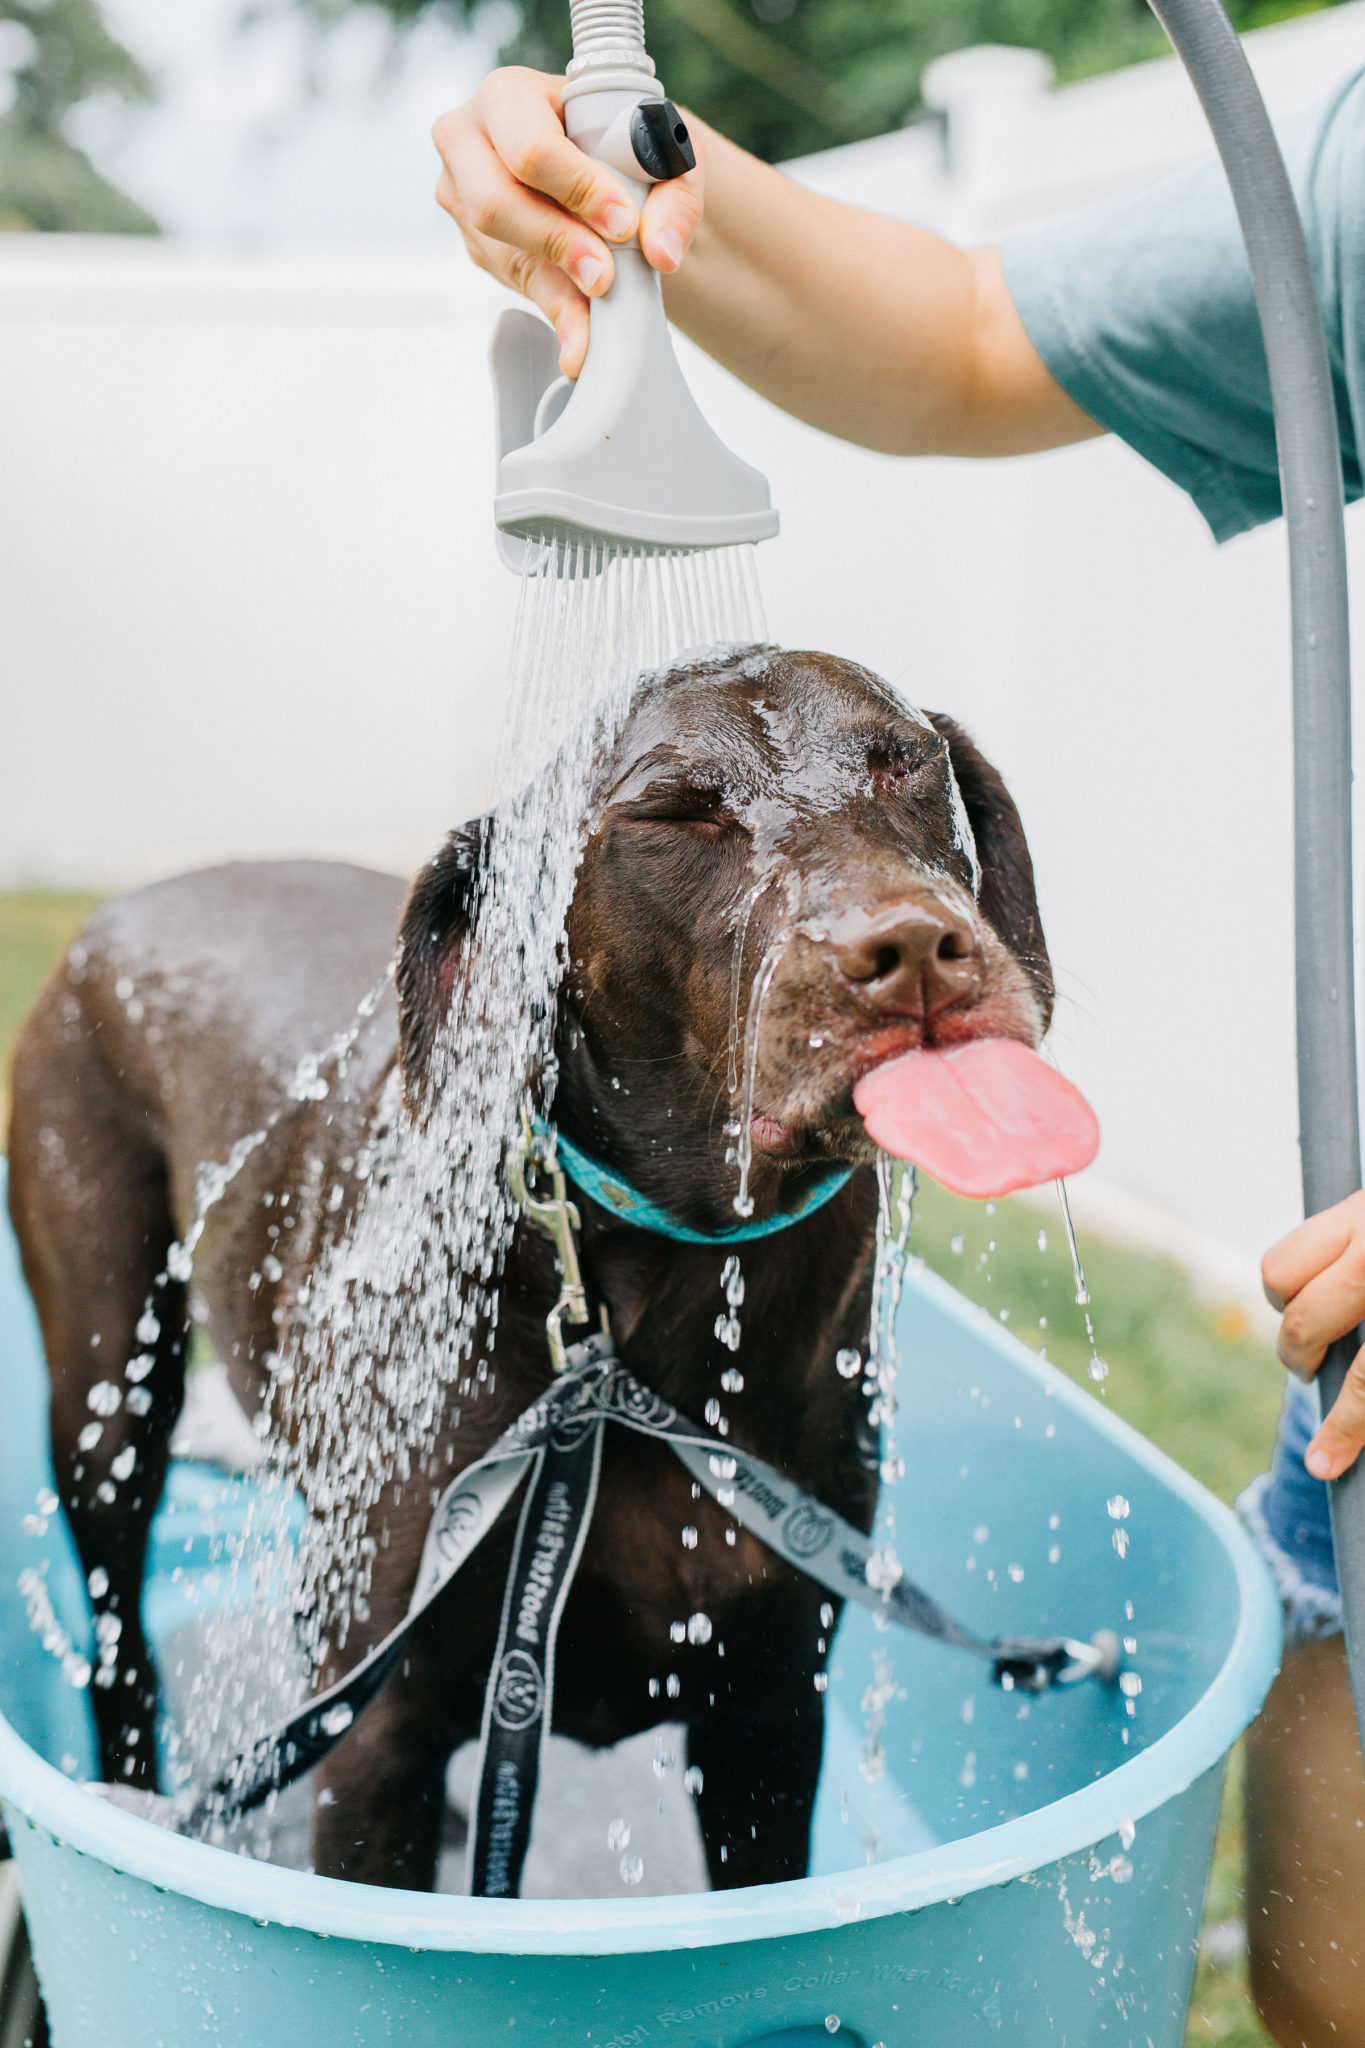 Booster Bath For Dogs: Outdoor Dog Wash Station